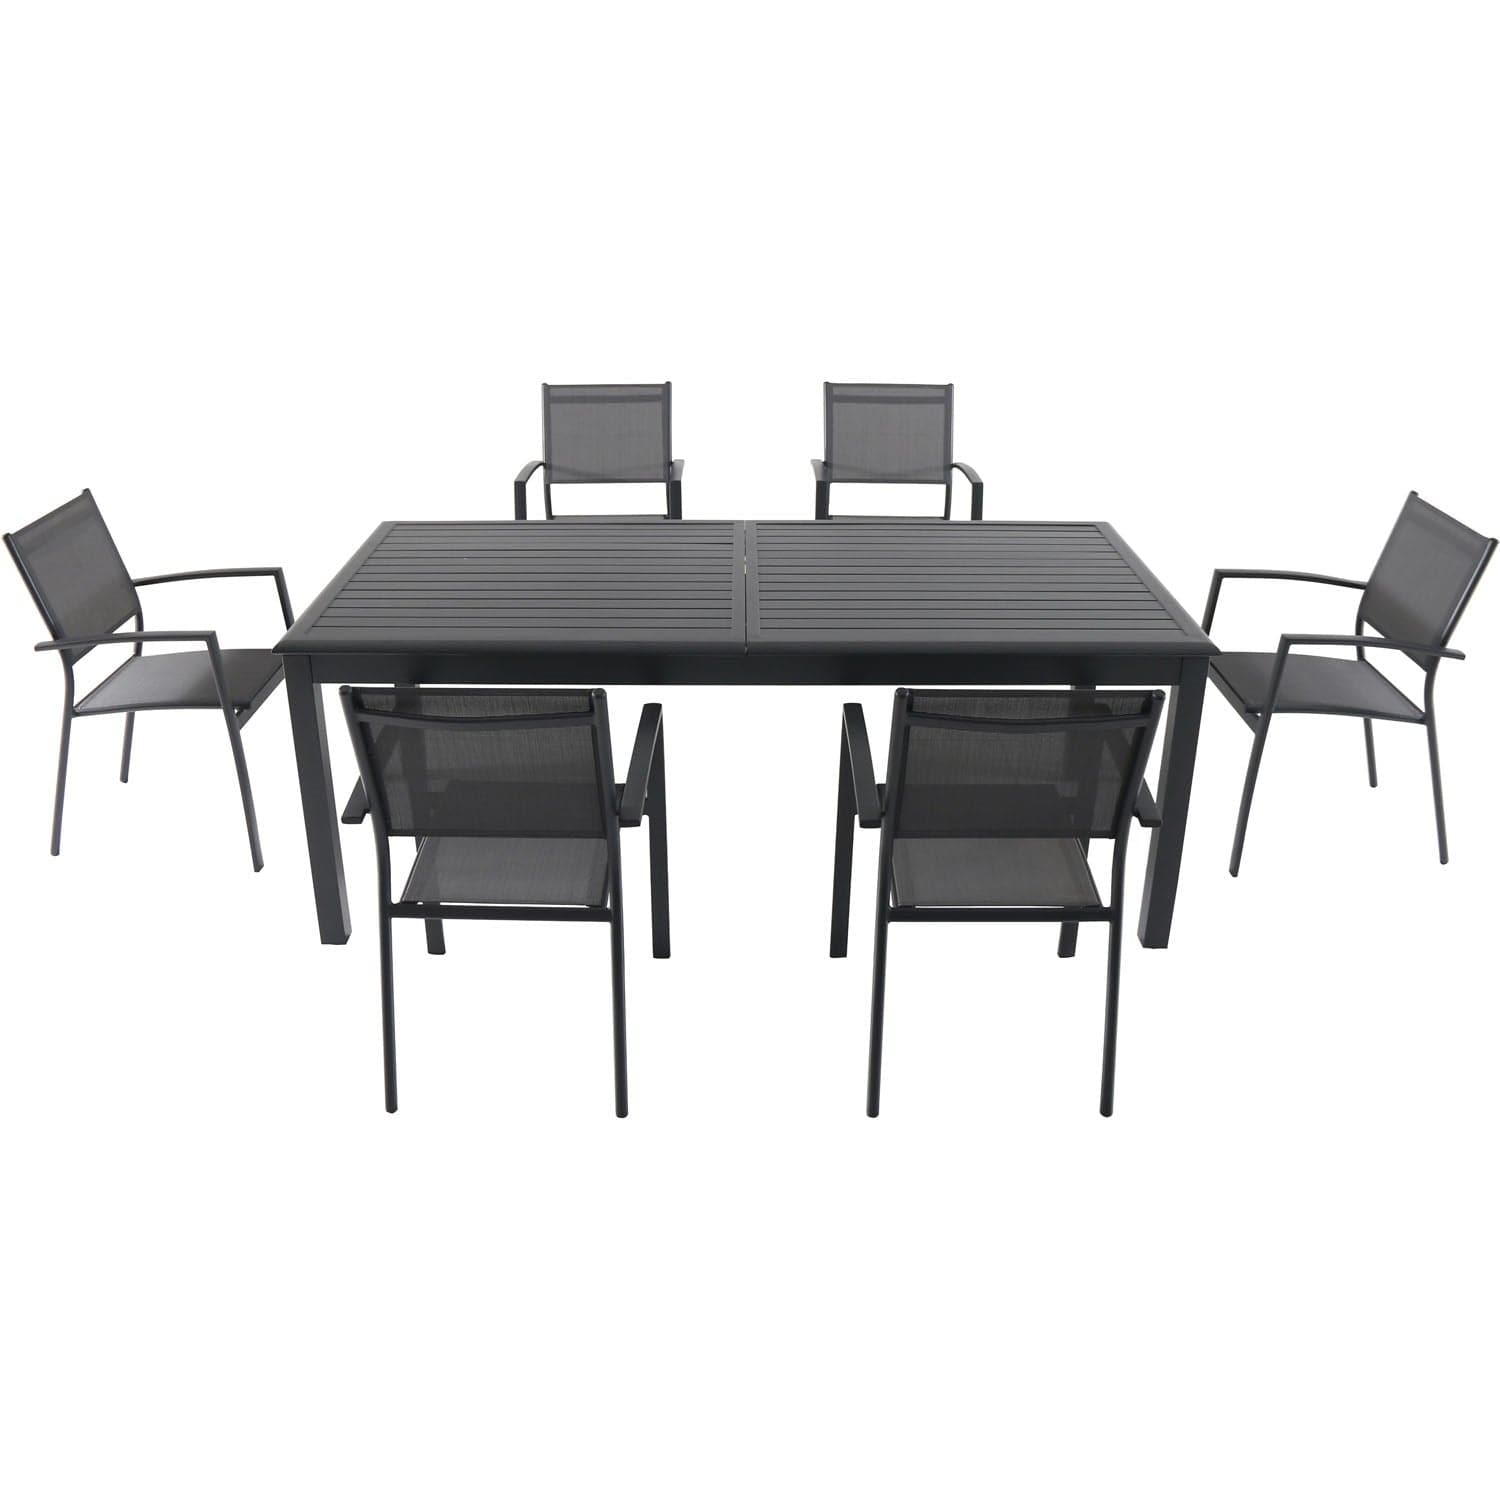 Hanover Outdoor Dining Set Hanover Dawson 7-Piece Dining Set with 6 Sling Chairs and an Expandable 40" x 118" Table | DAWDN7PC-GRY